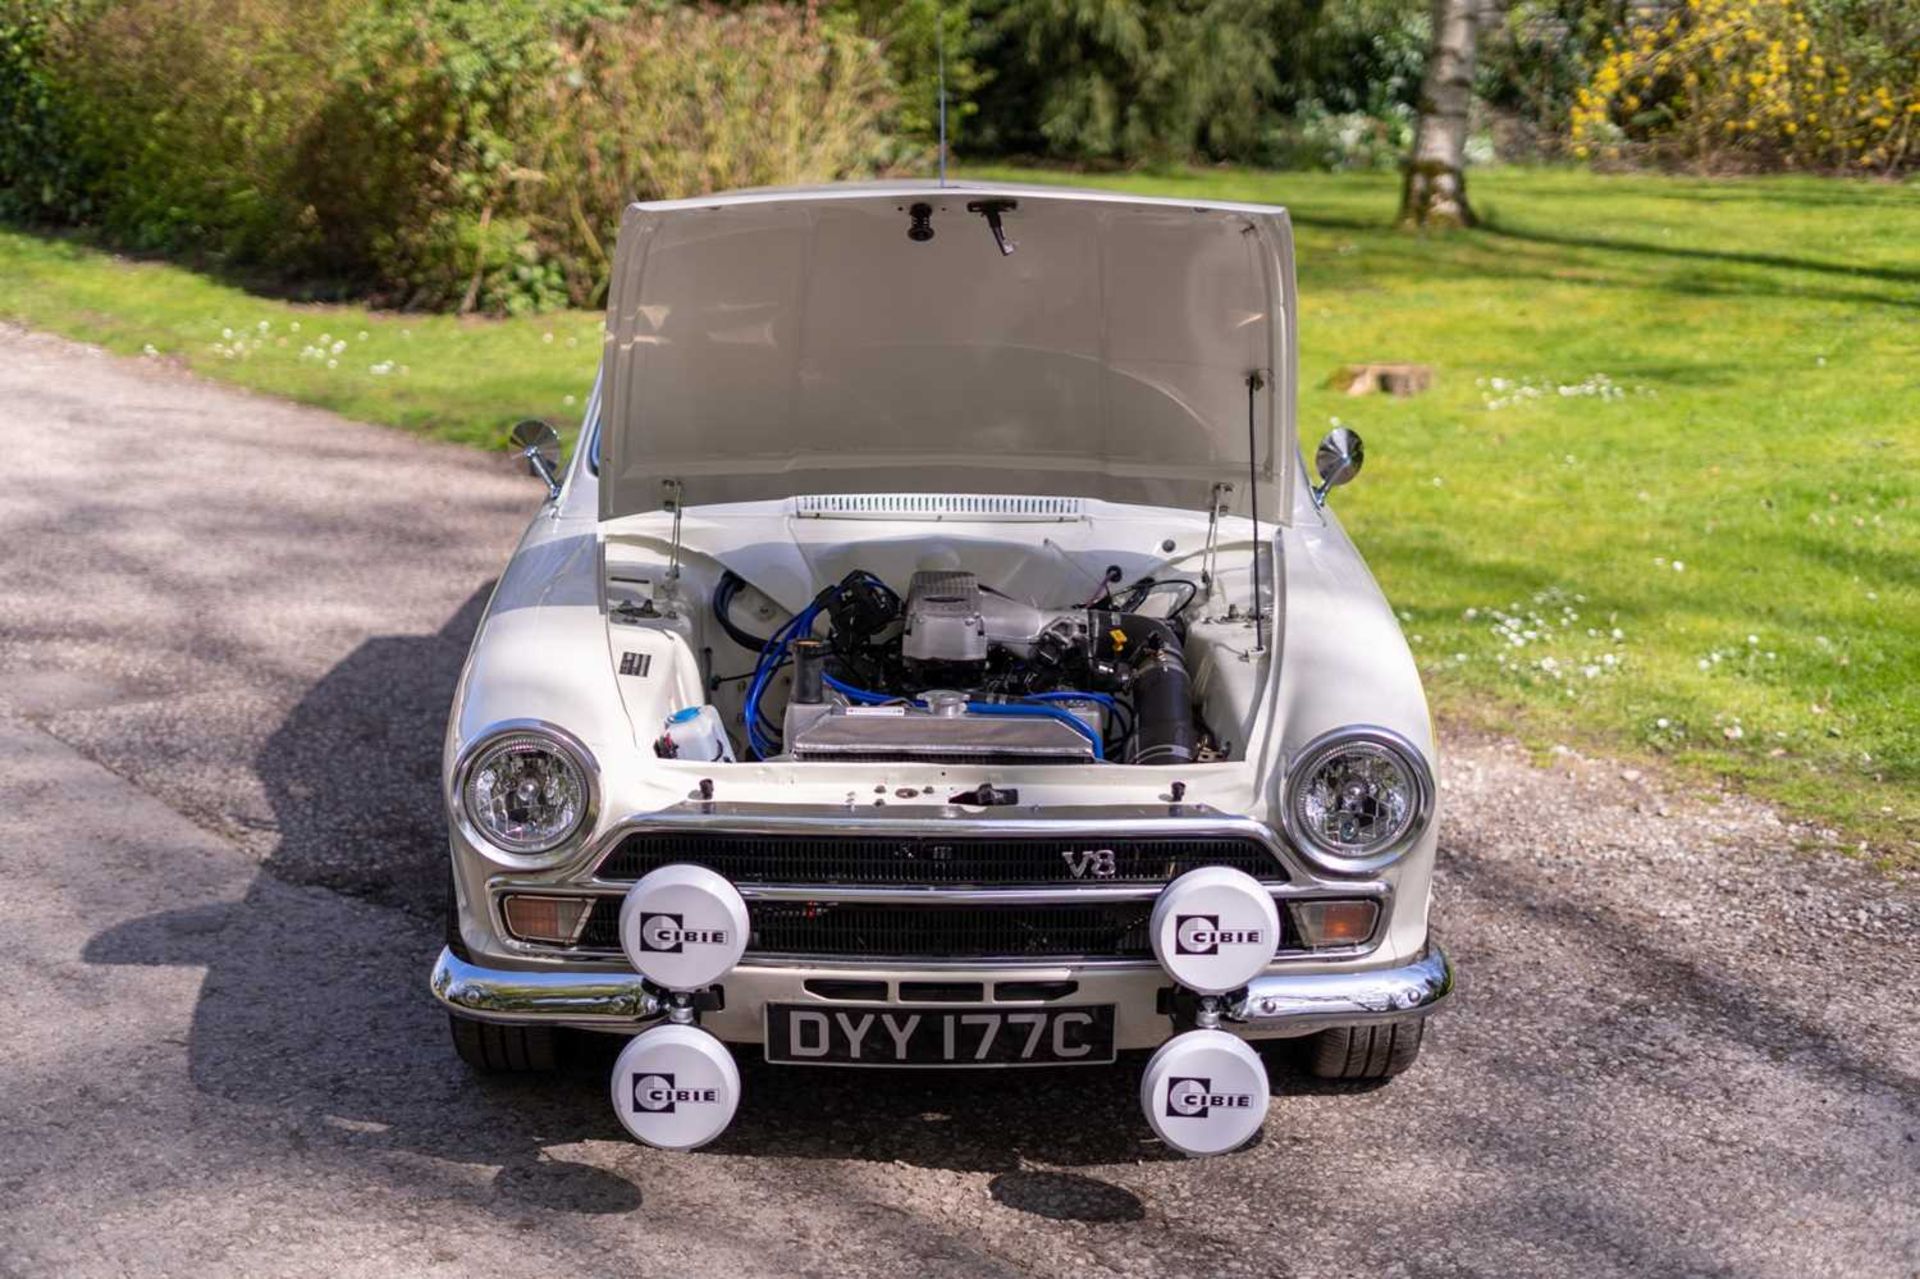 1965 Ford Cortina Super V8 Just 928 miles travelled since the completion  - Image 15 of 71